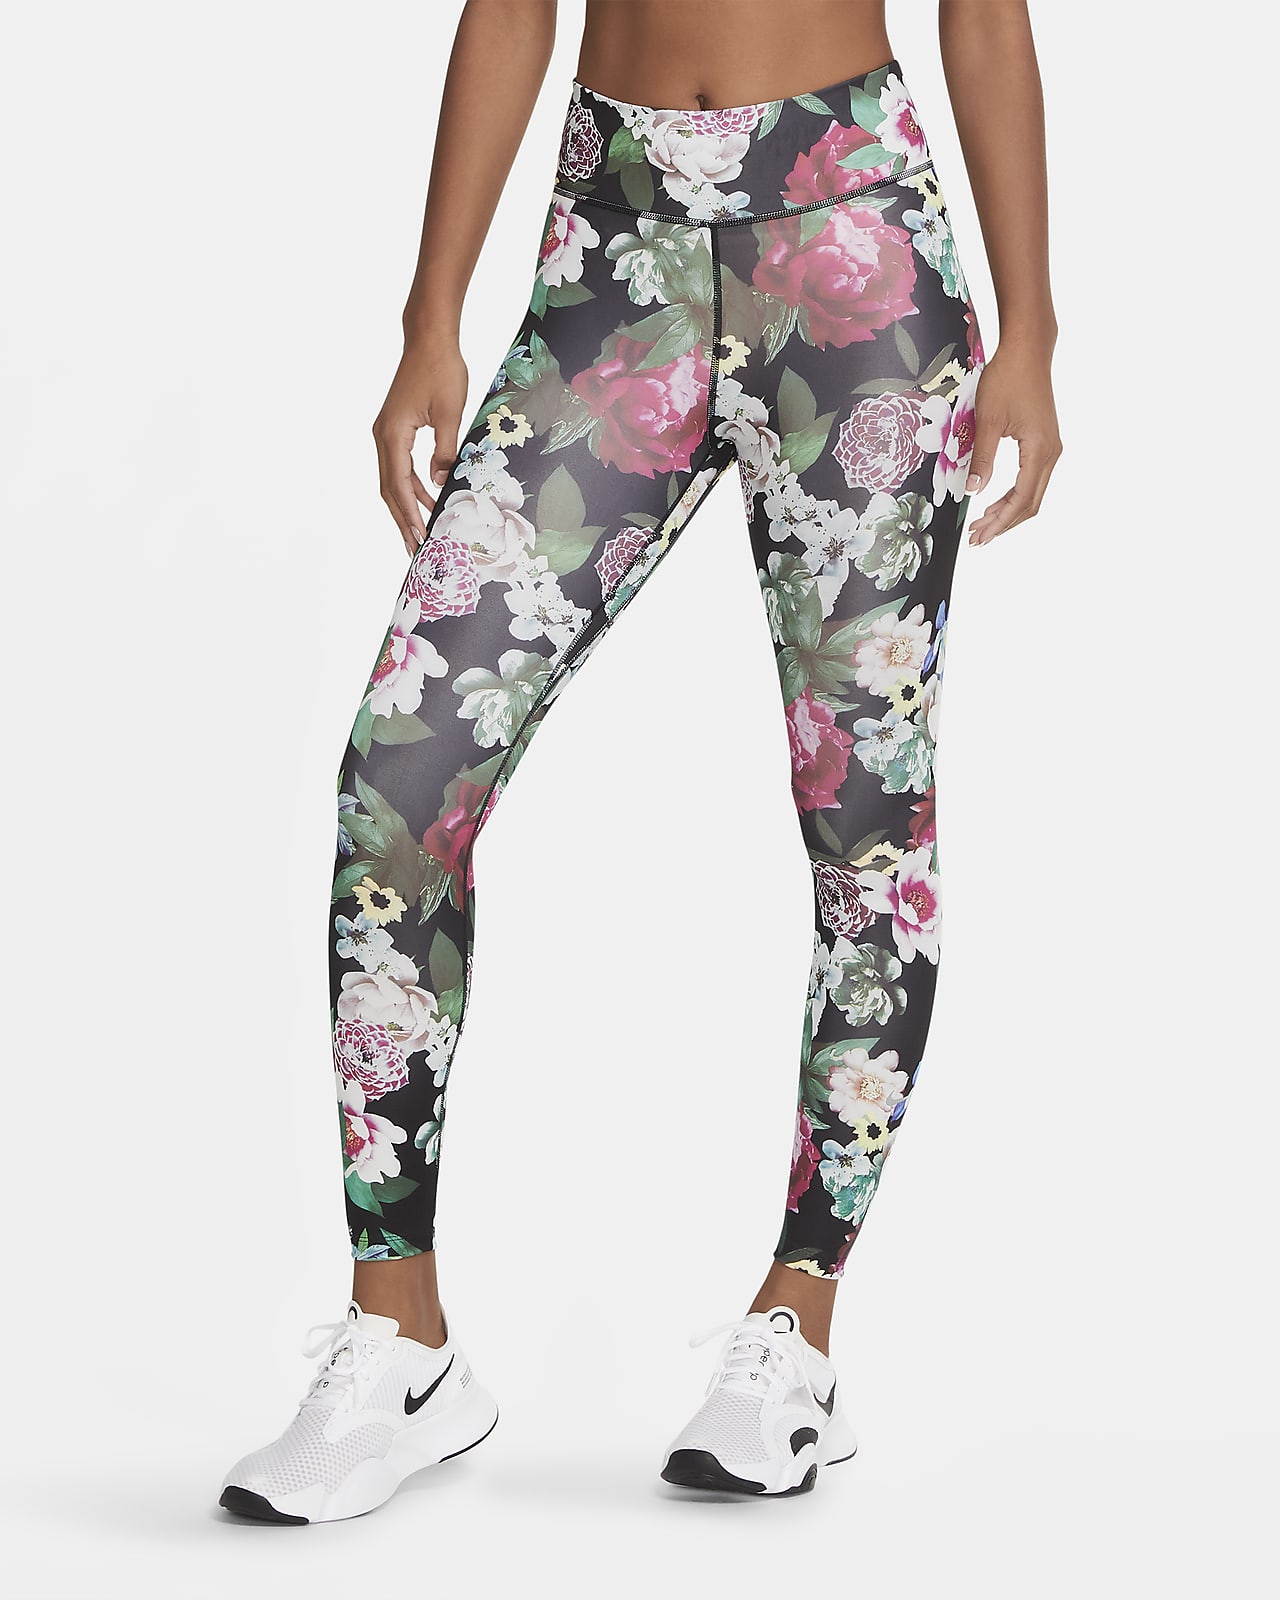 Nike One Women's Floral 7/8 Tights 